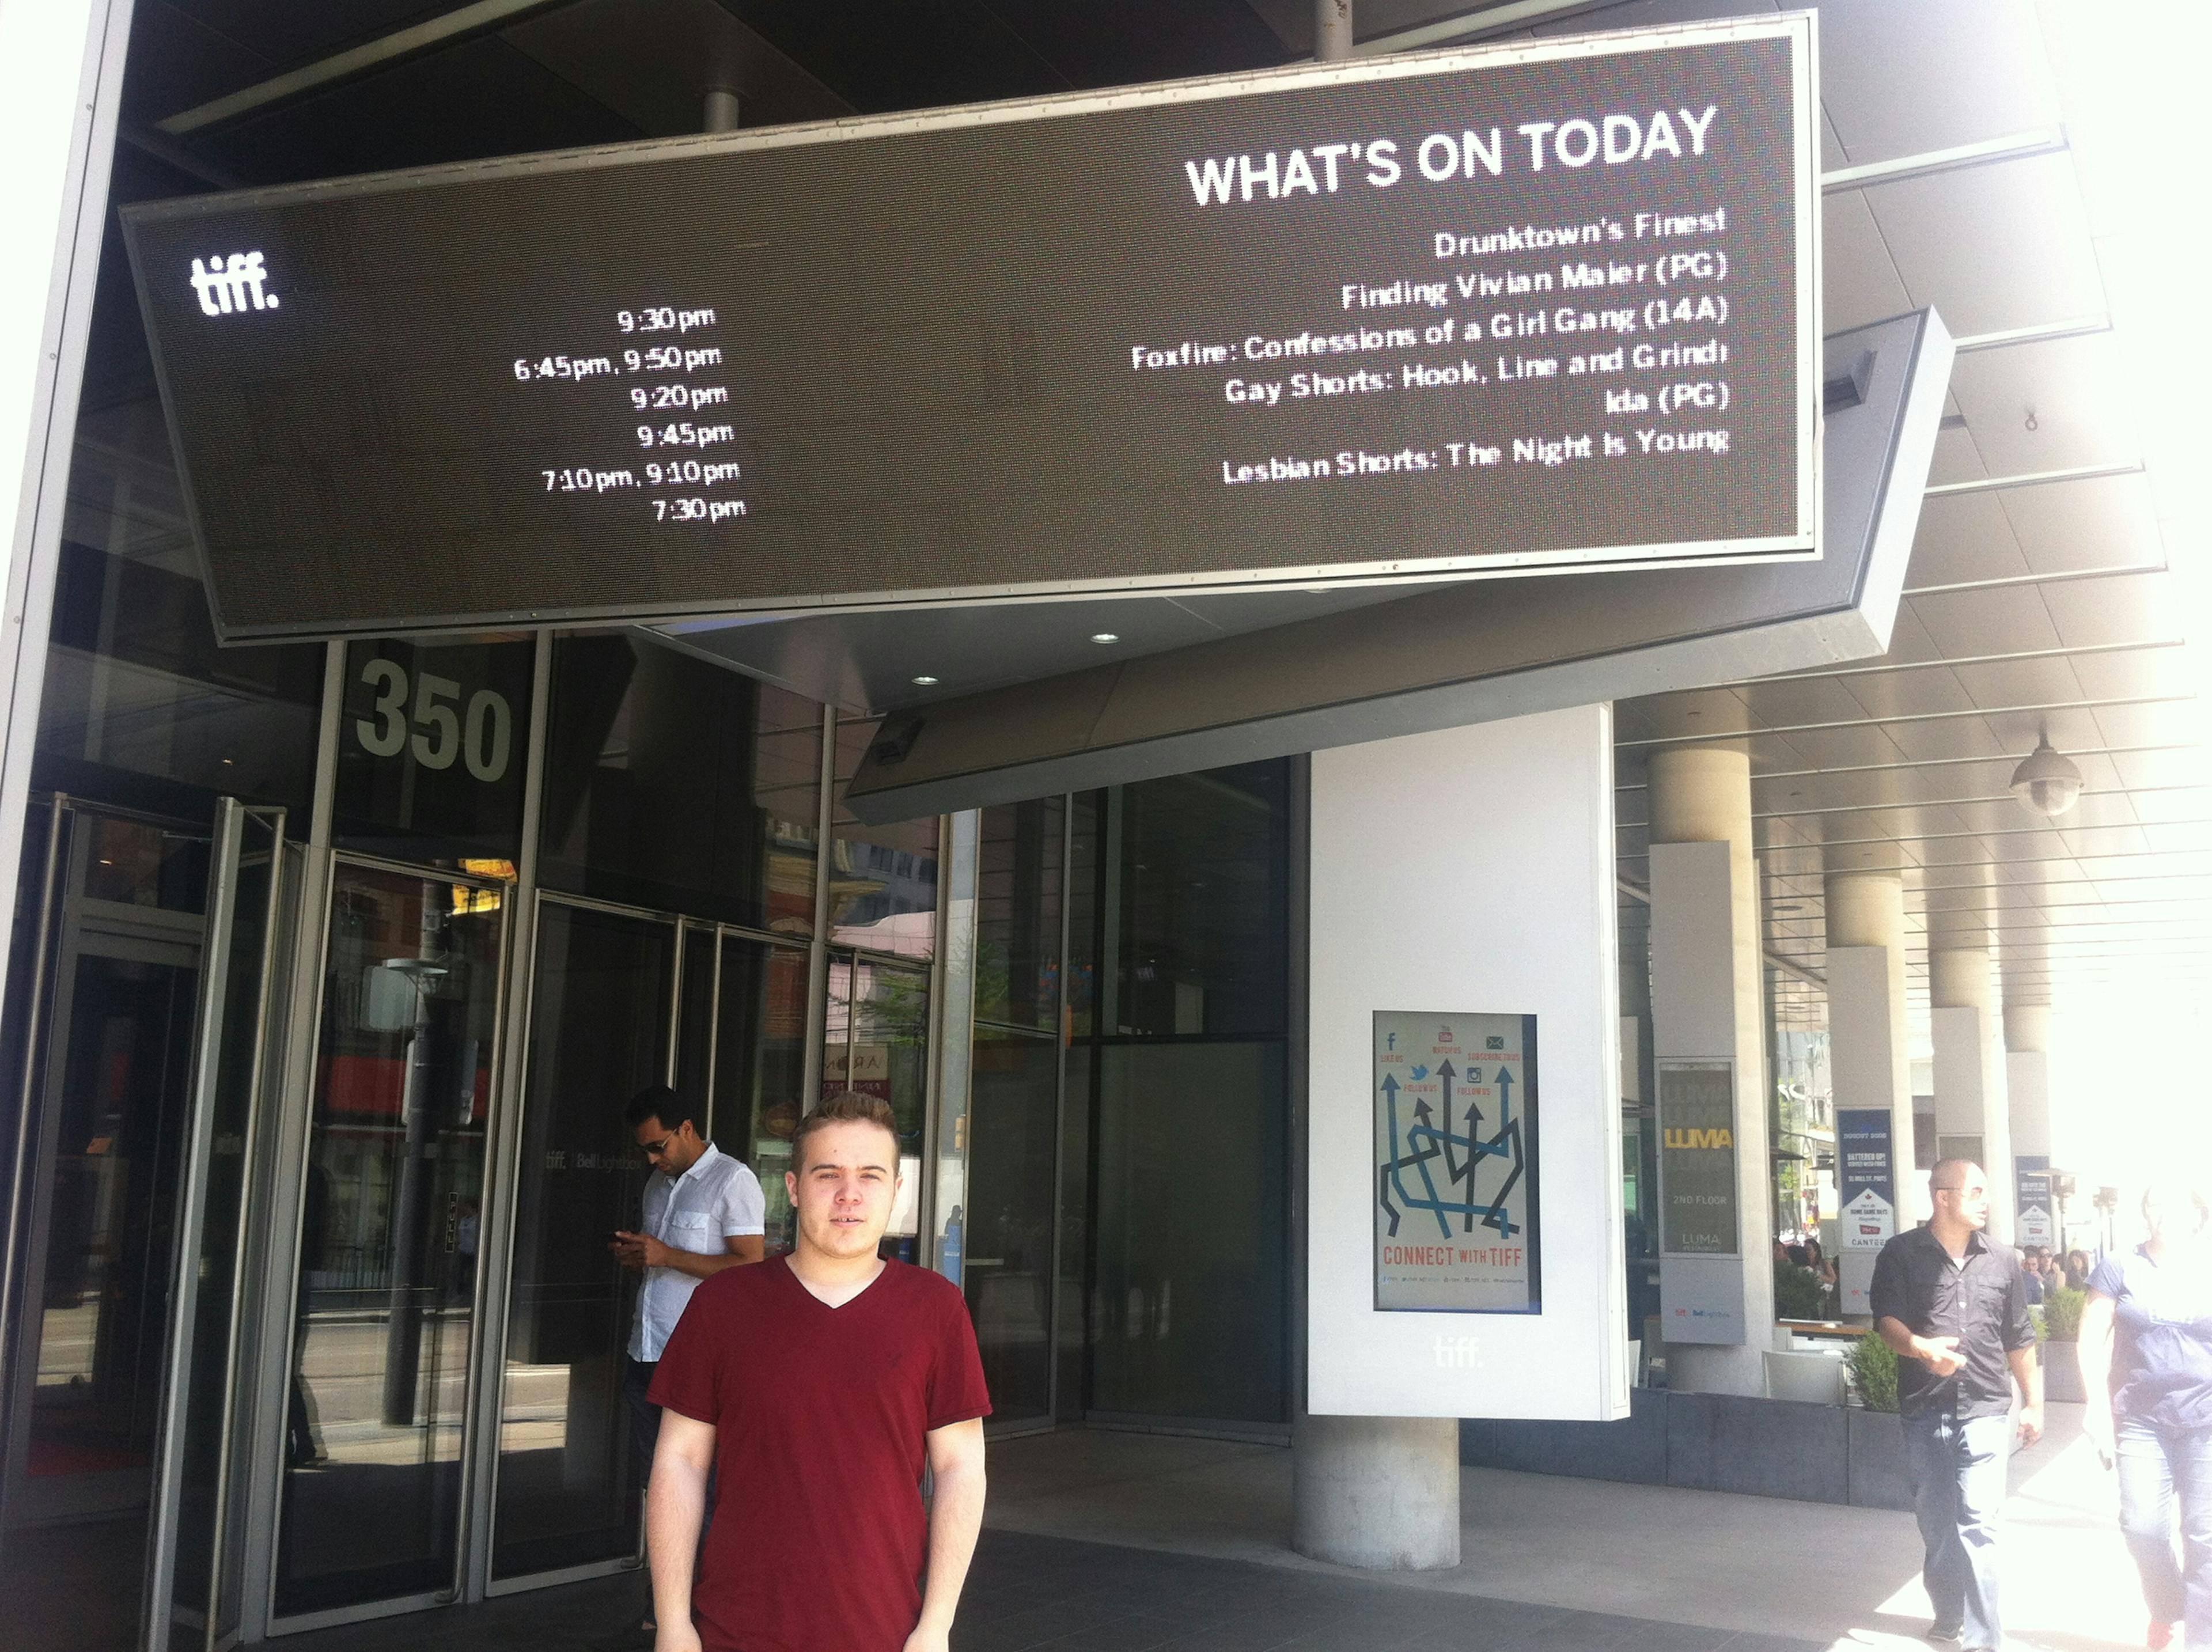 Image of a younger man, wearing a red t shirt, underneath a tiff sign that reads "What's on today" with various screenings